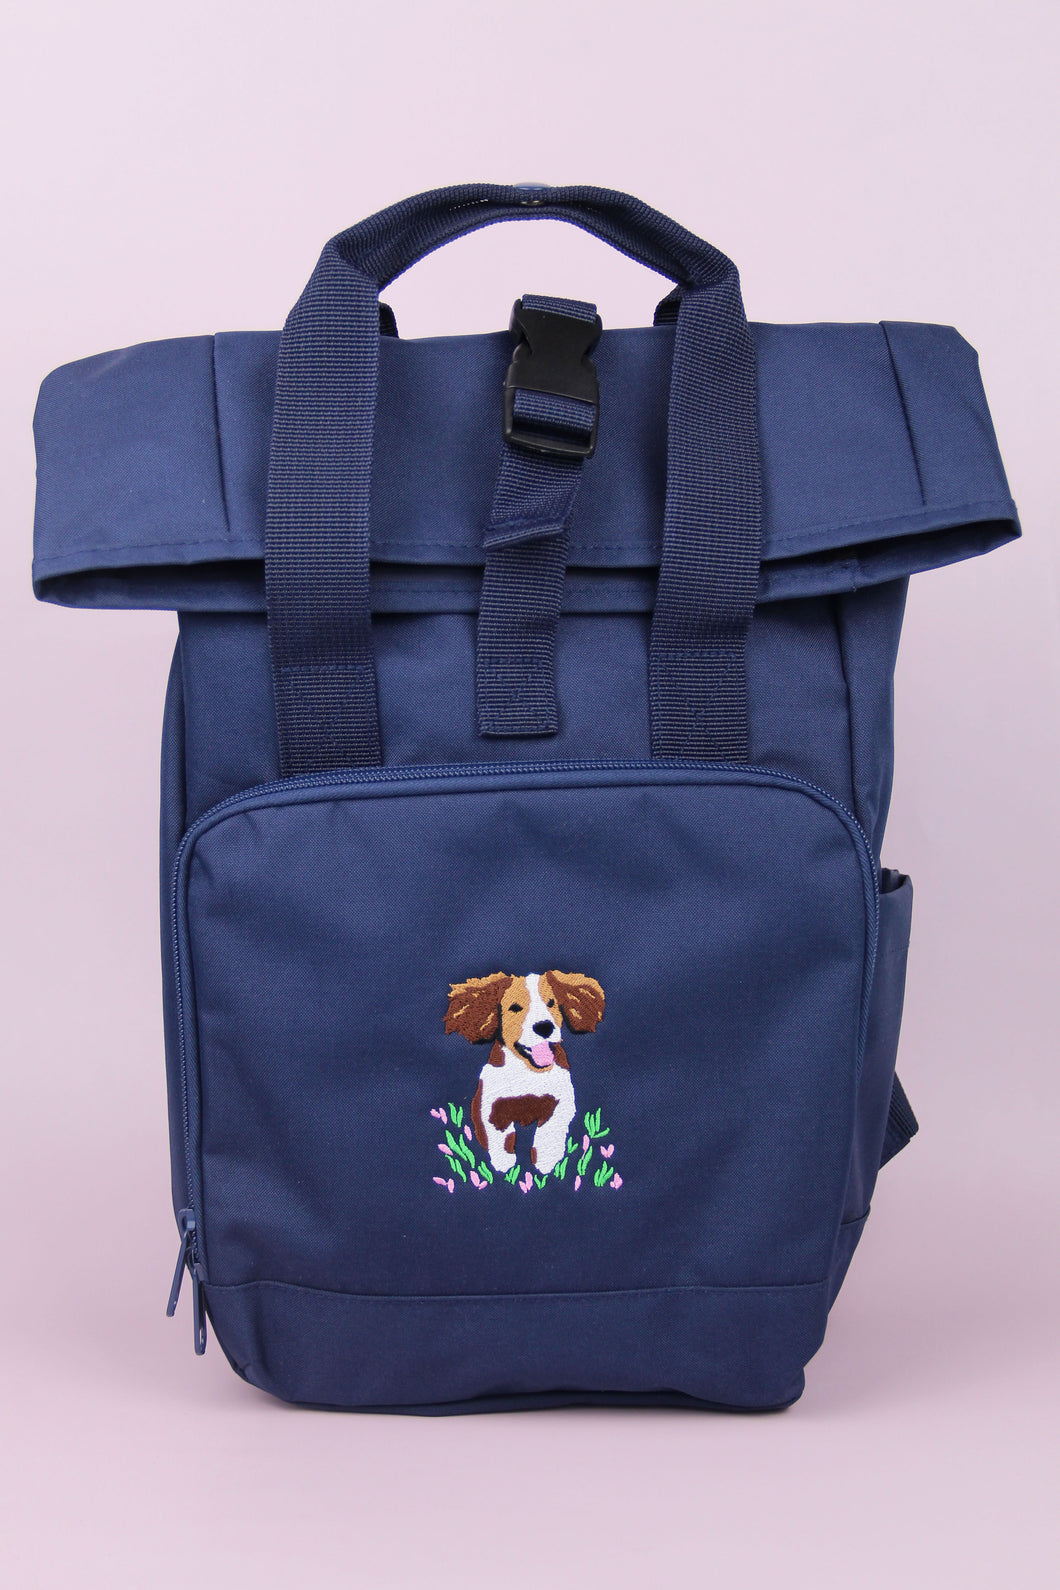 Spaniel Recycled Backpack - Navy